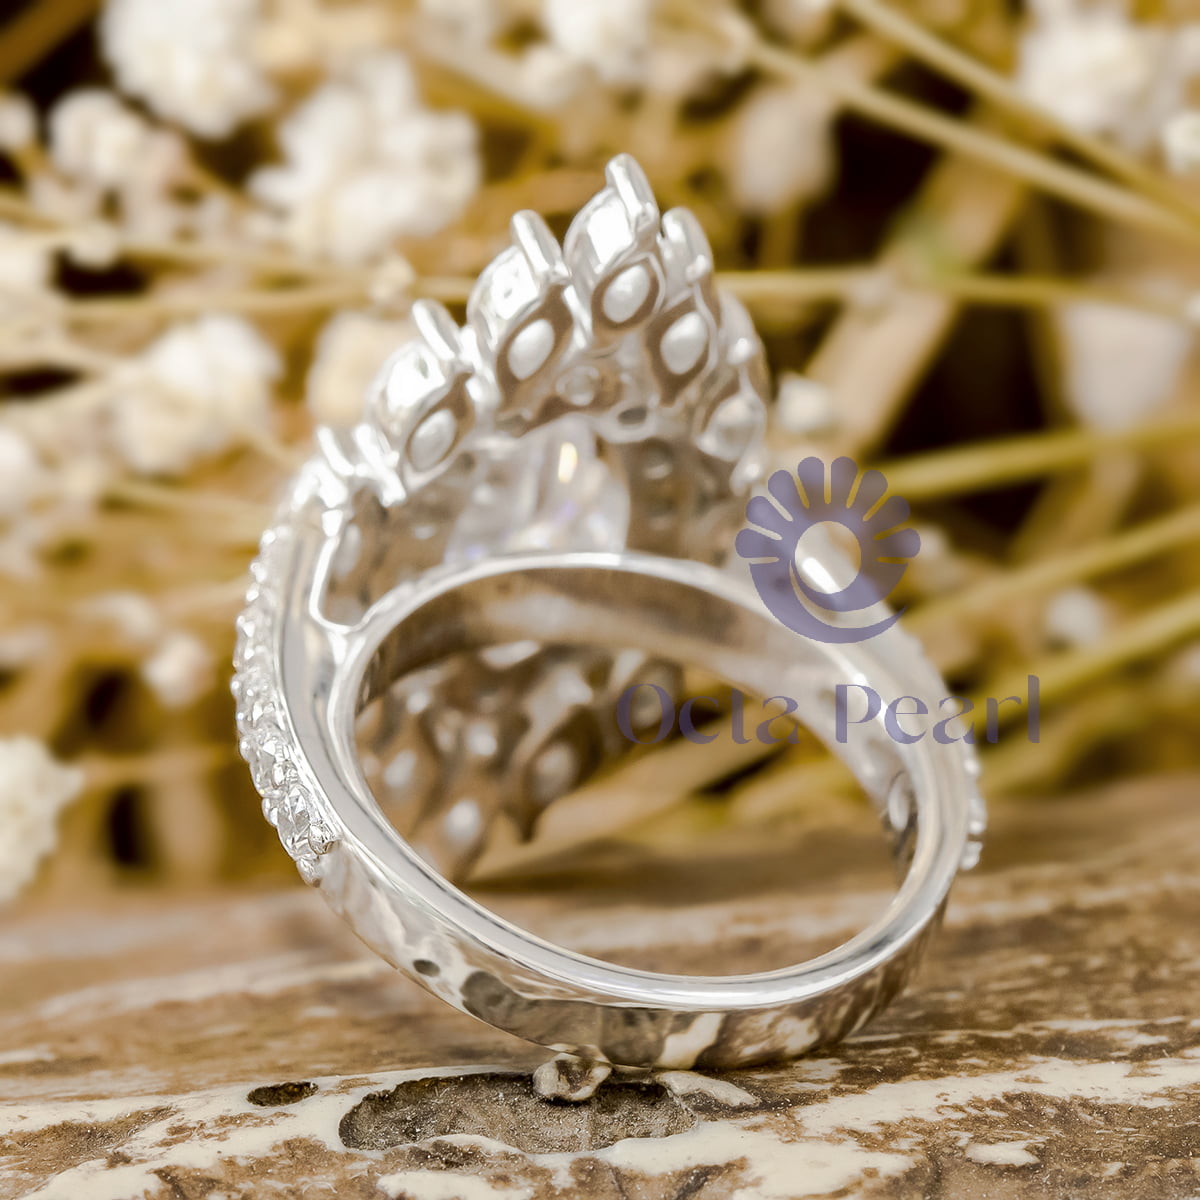 Marquise With Round Cut CZ Stone Halo Cocktail Party Wear Ring By Octa Pearl ( 3 7/9 TCW )